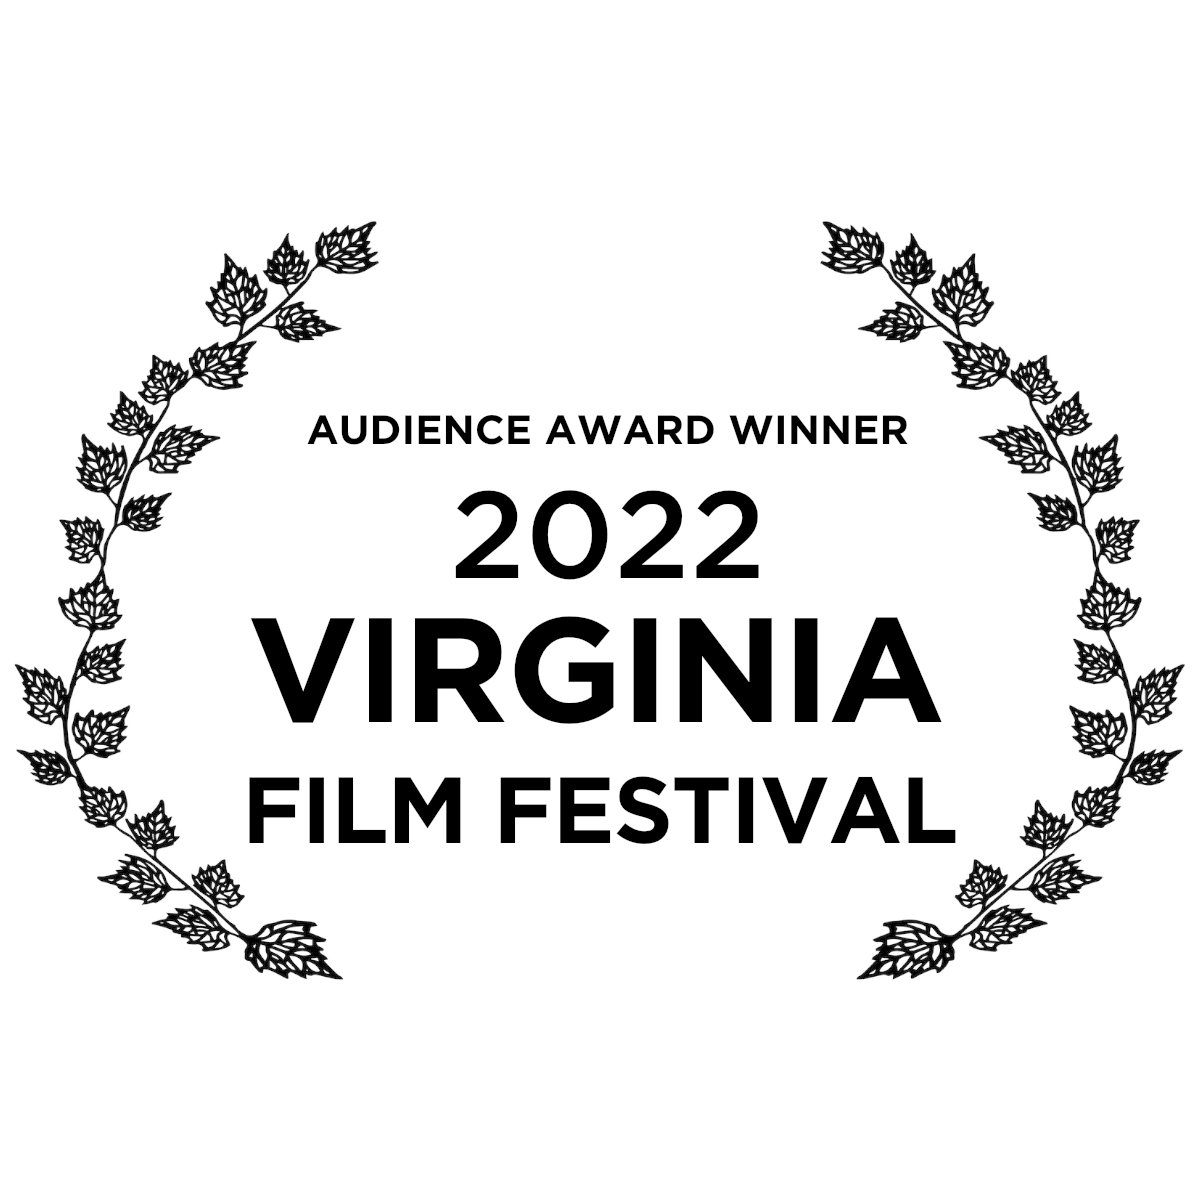 Drumroll! 🥁🥁 We won the Audience Award for Best Documentary at the @VaFilmFest!! Savoring our incredible win and the joy of sharing @daniizzie's story and our messages with audiences near and far. #VAFF2022 #DisabilityJustice #DisabilityAdvocacy #Documentary @PerpetuoFilms